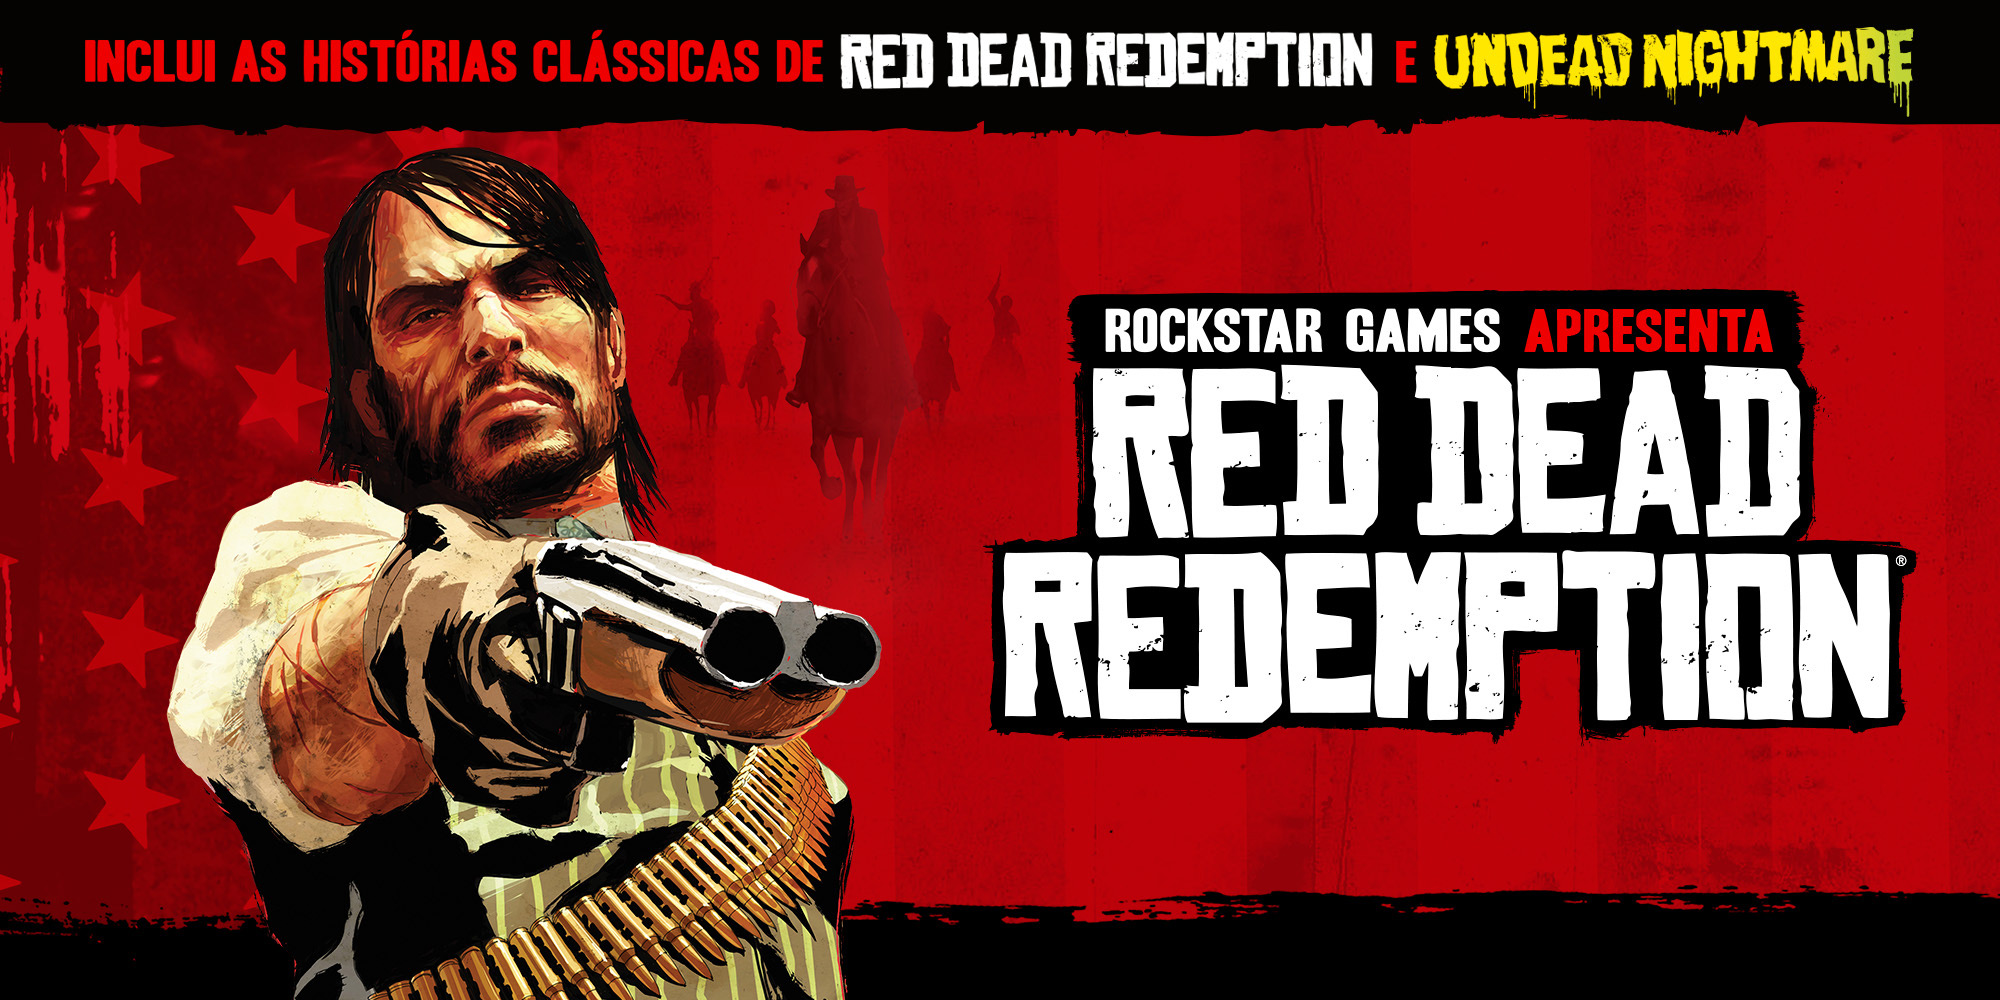 Red Dead Redemption - University of Oklahoma Press